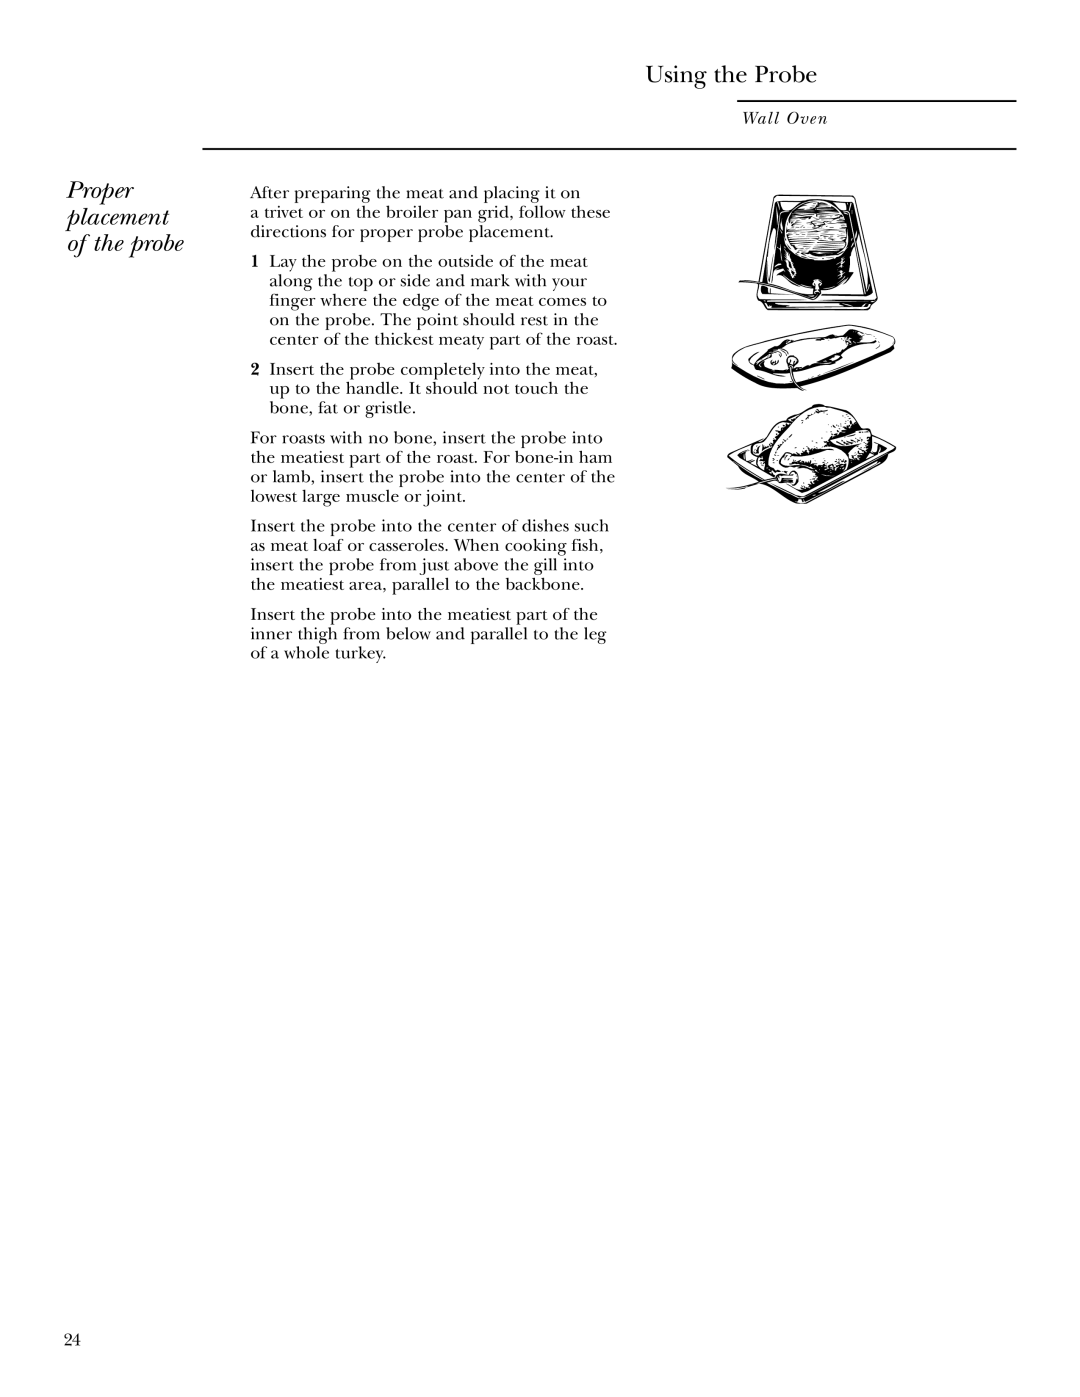 GE ZEK958, ZEK938 owner manual Proper placement of the probe, Using the Probe, Wall Oven 